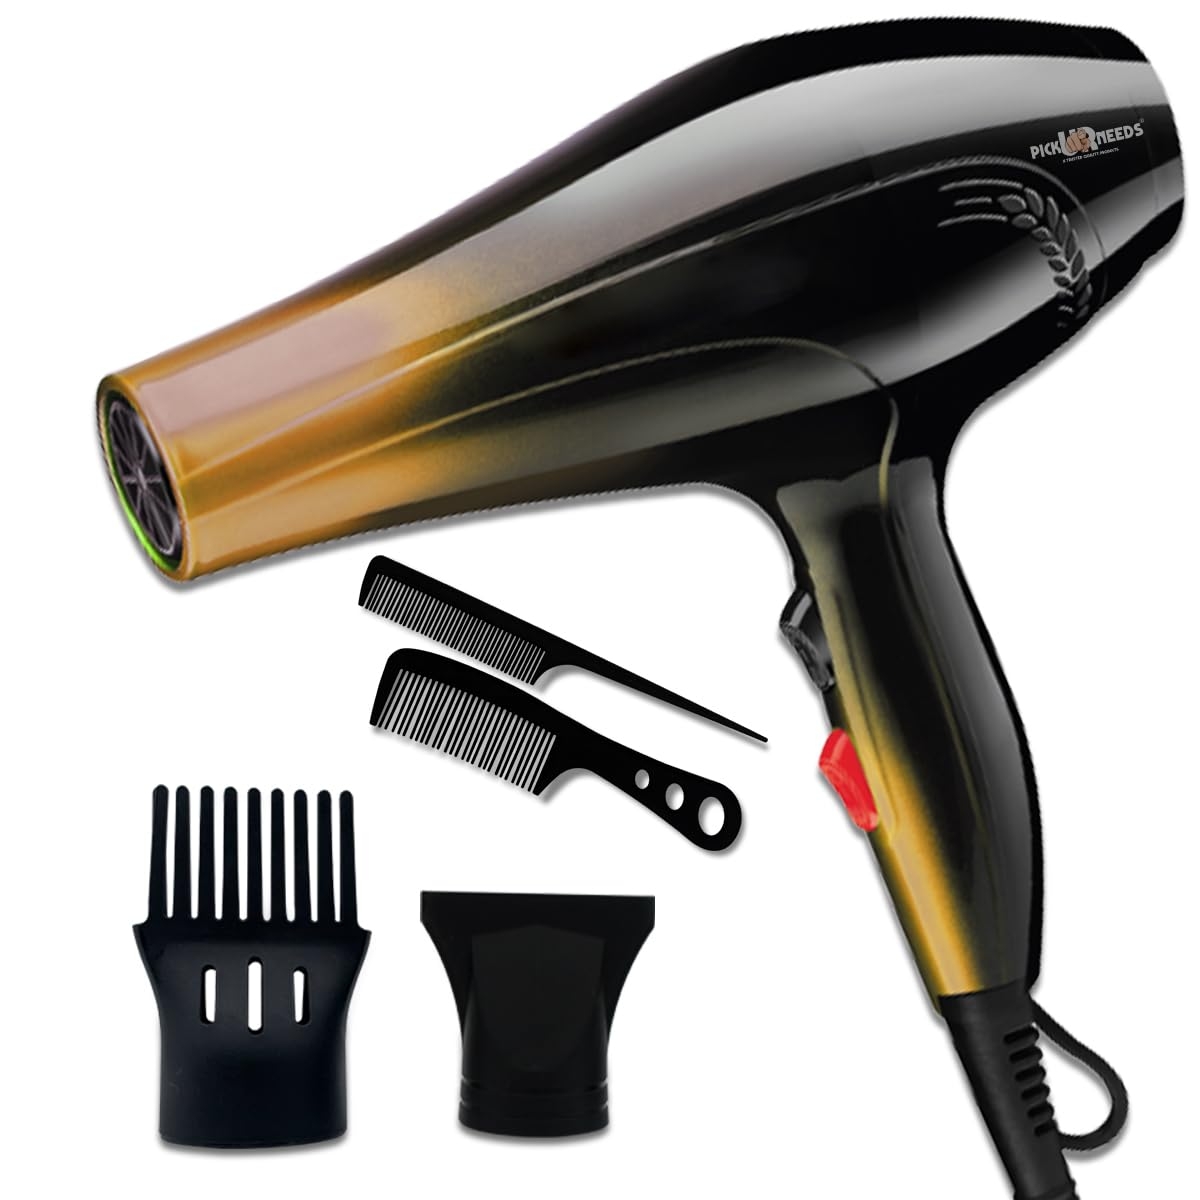 Pick Ur Needs Professional Stylish Hair Dryers For Women & Men Hot And Cold Dryer With Comb Reducer (3500 Watt) Hair Dryers